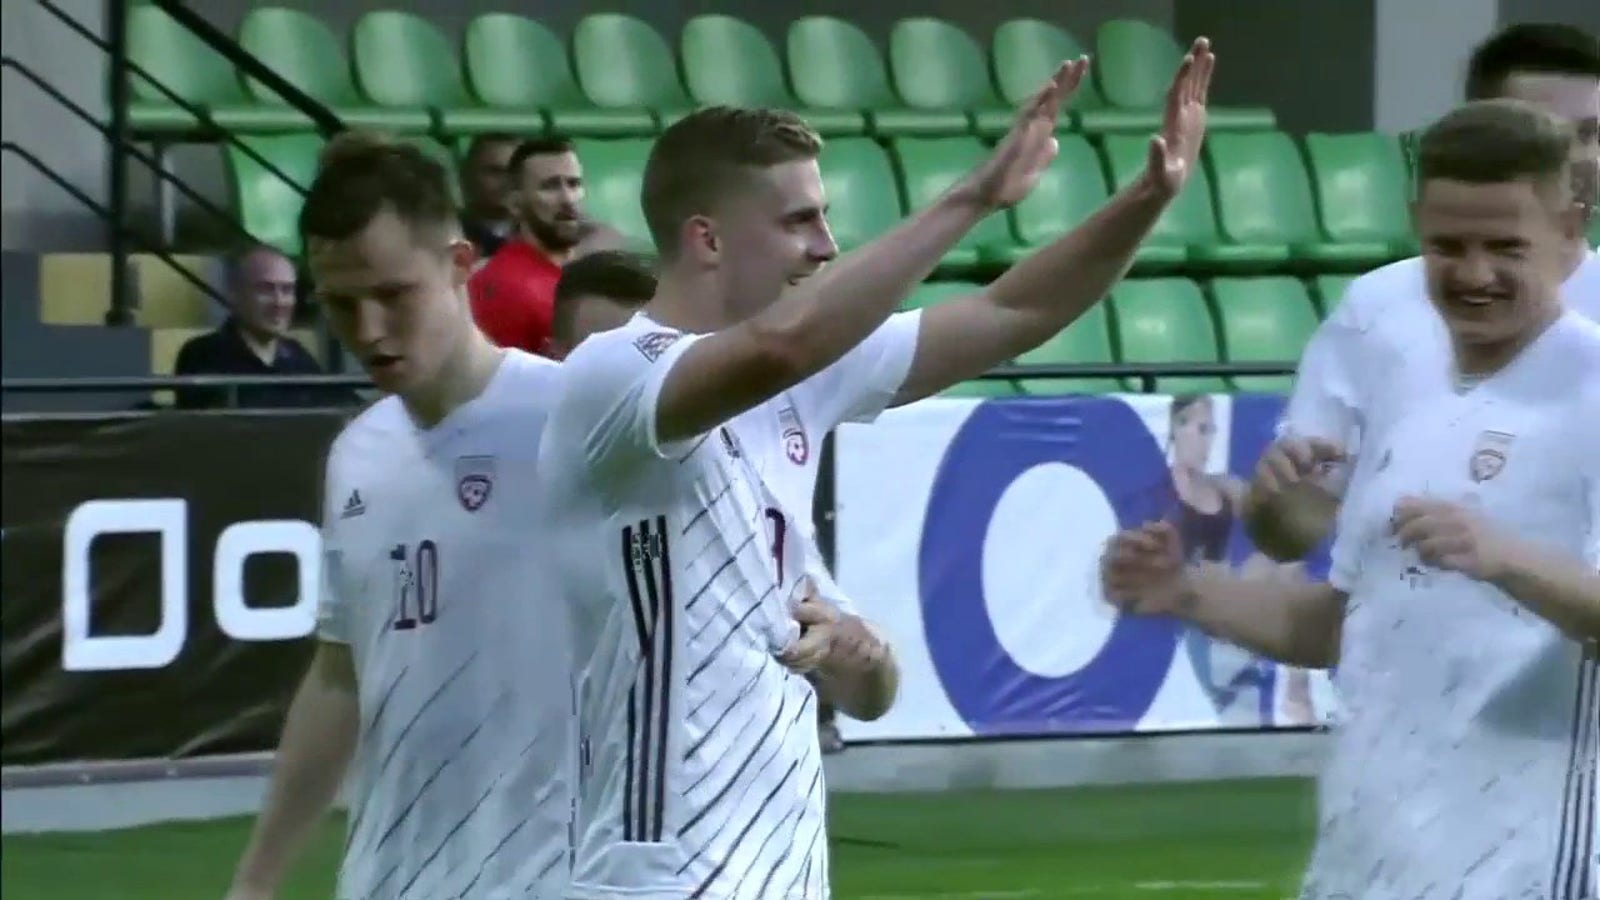 A lucky bounce leads to a goal to put Latvia up 3-1